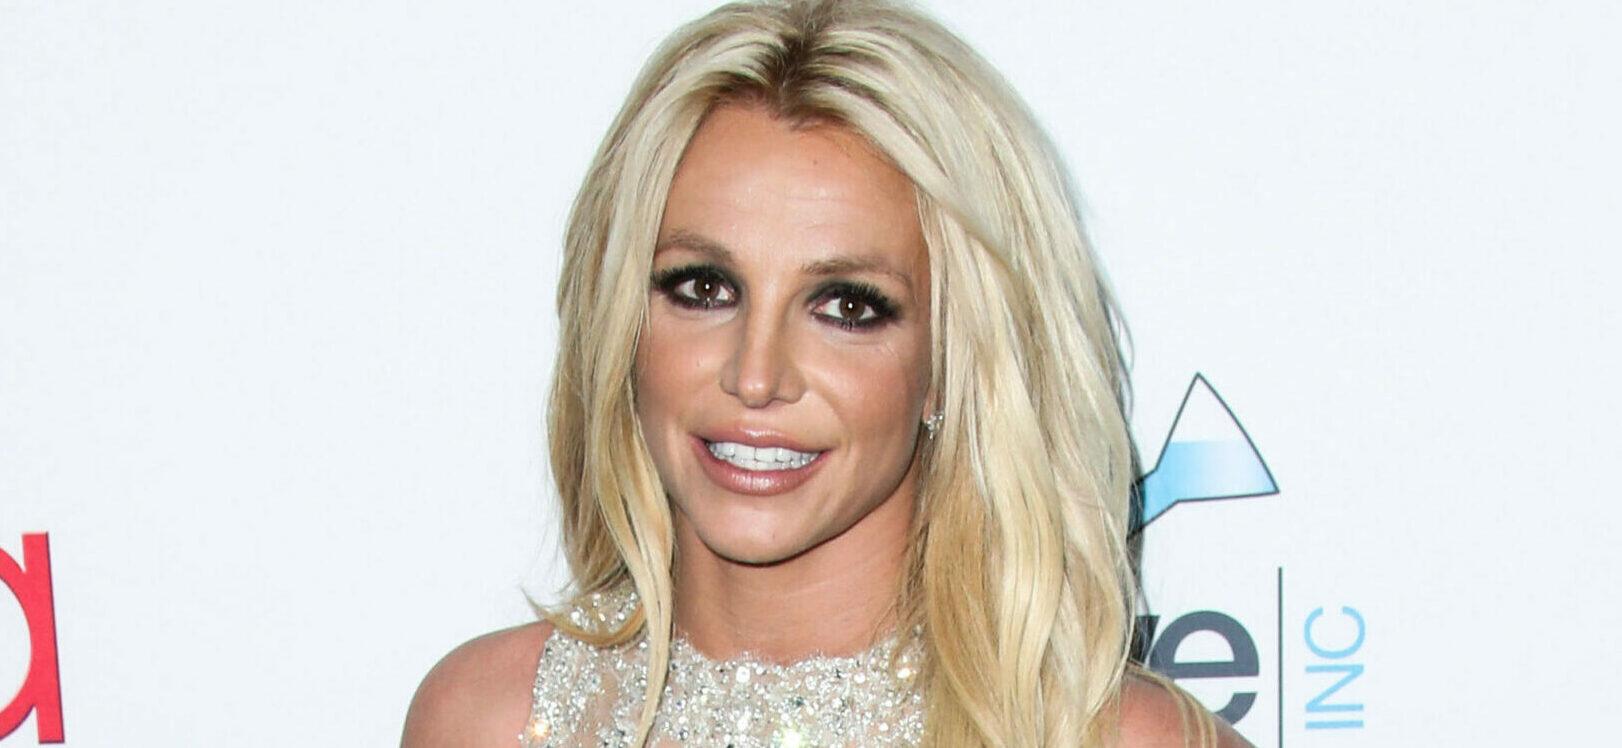 Britney Spears Flaunts Her Chest In Her Barely There Dress